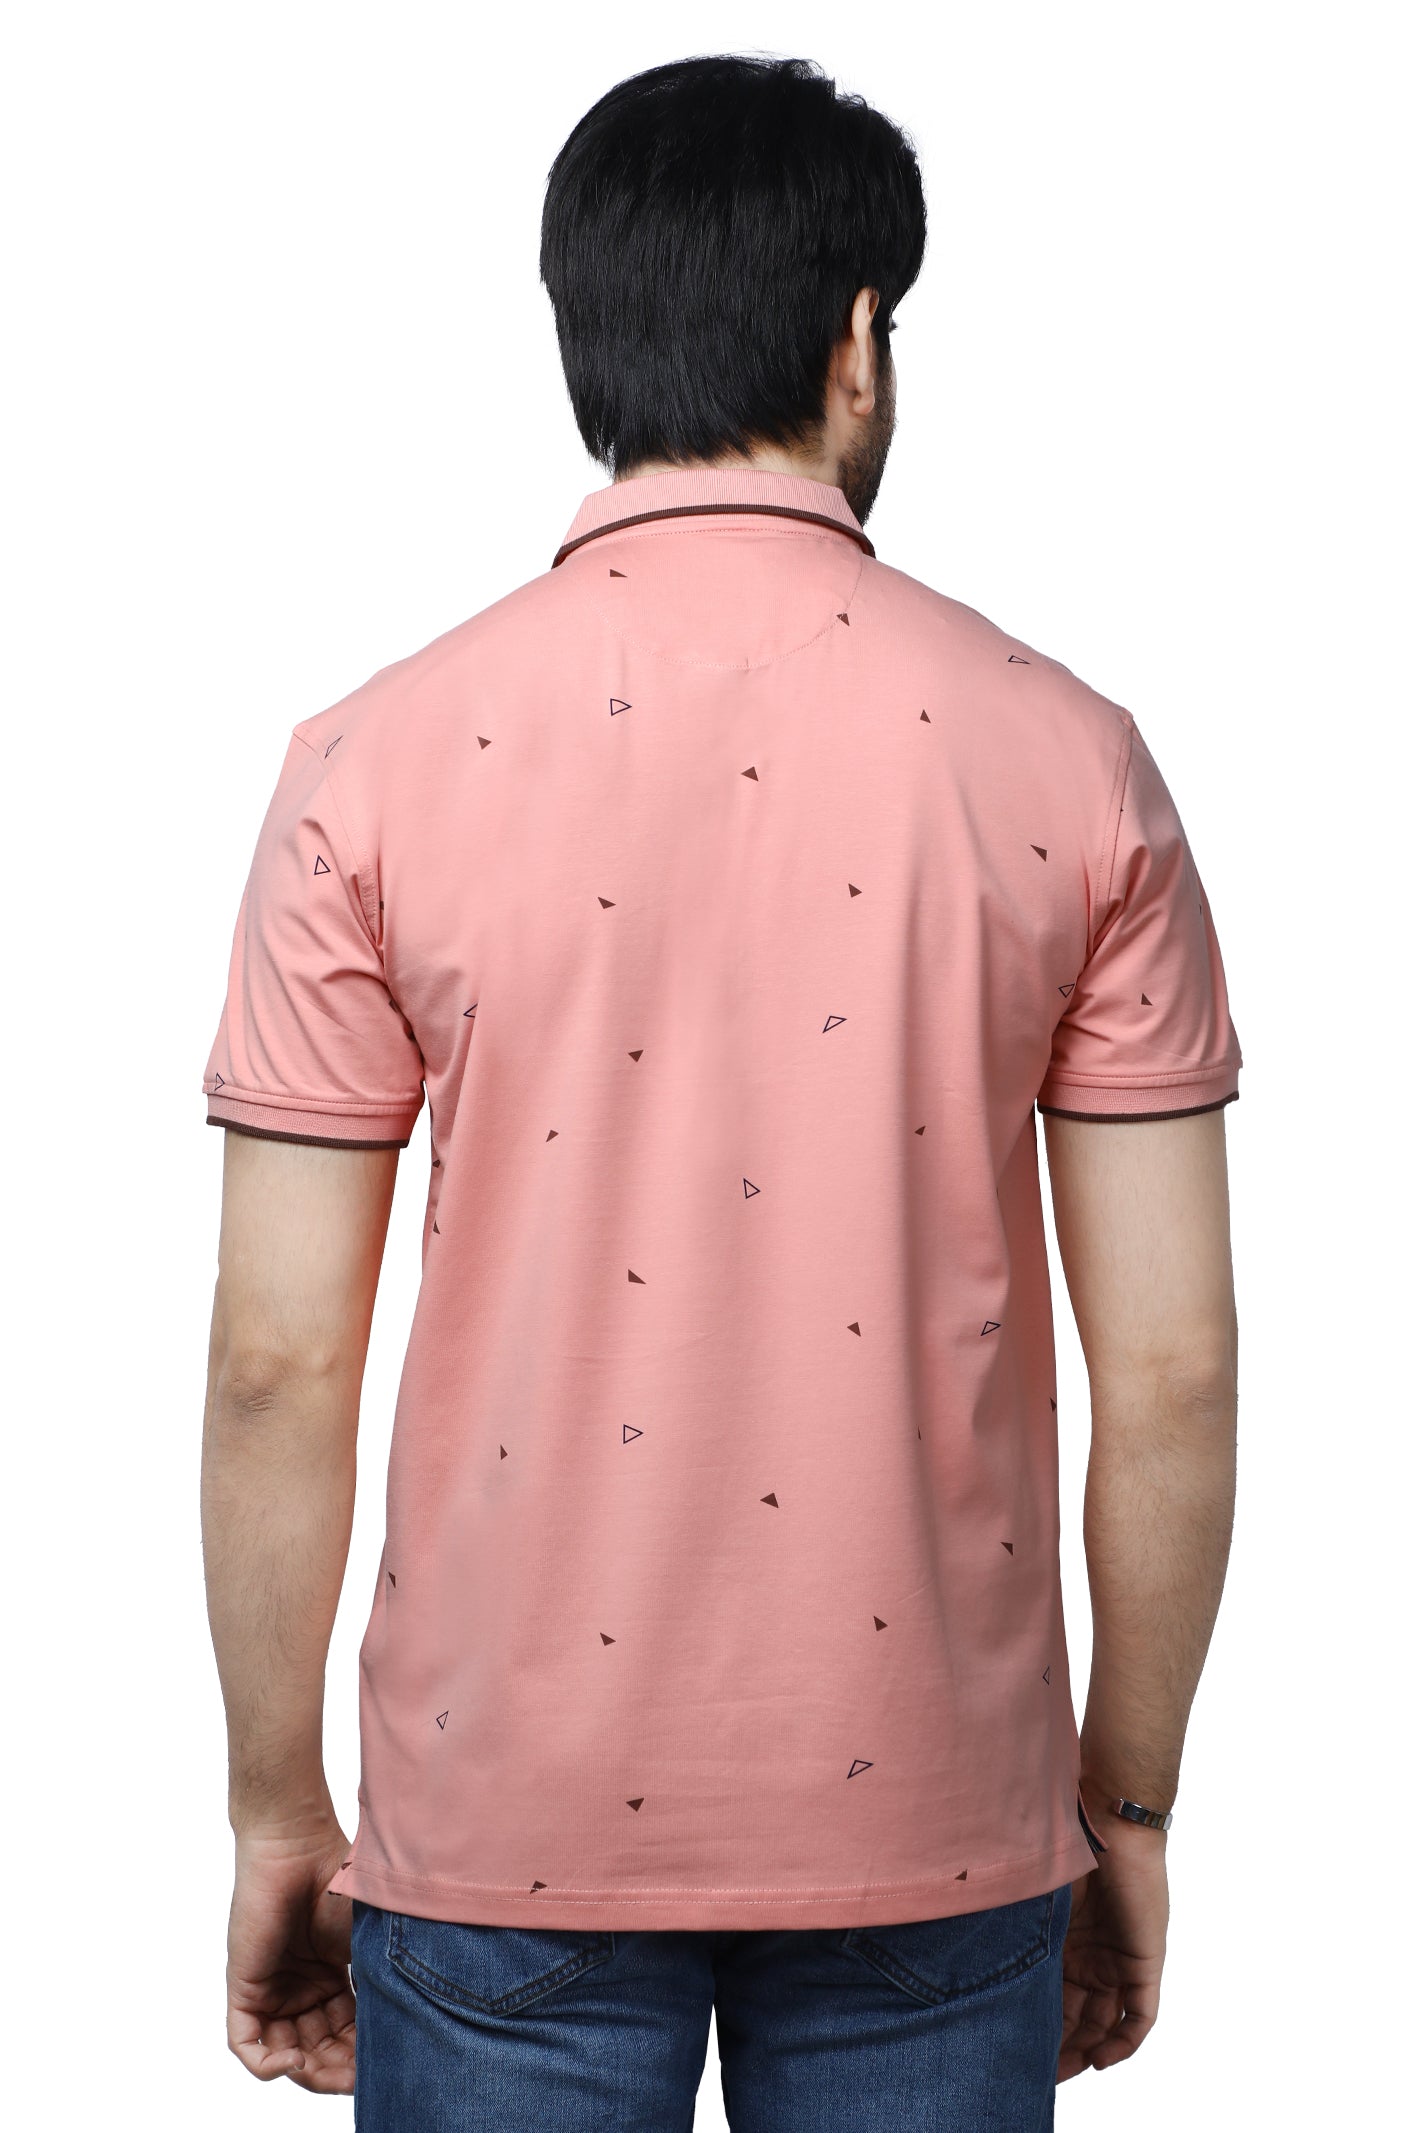 Diners Men's Polo T-Shirt SKU: NA889-PEACH - Diners